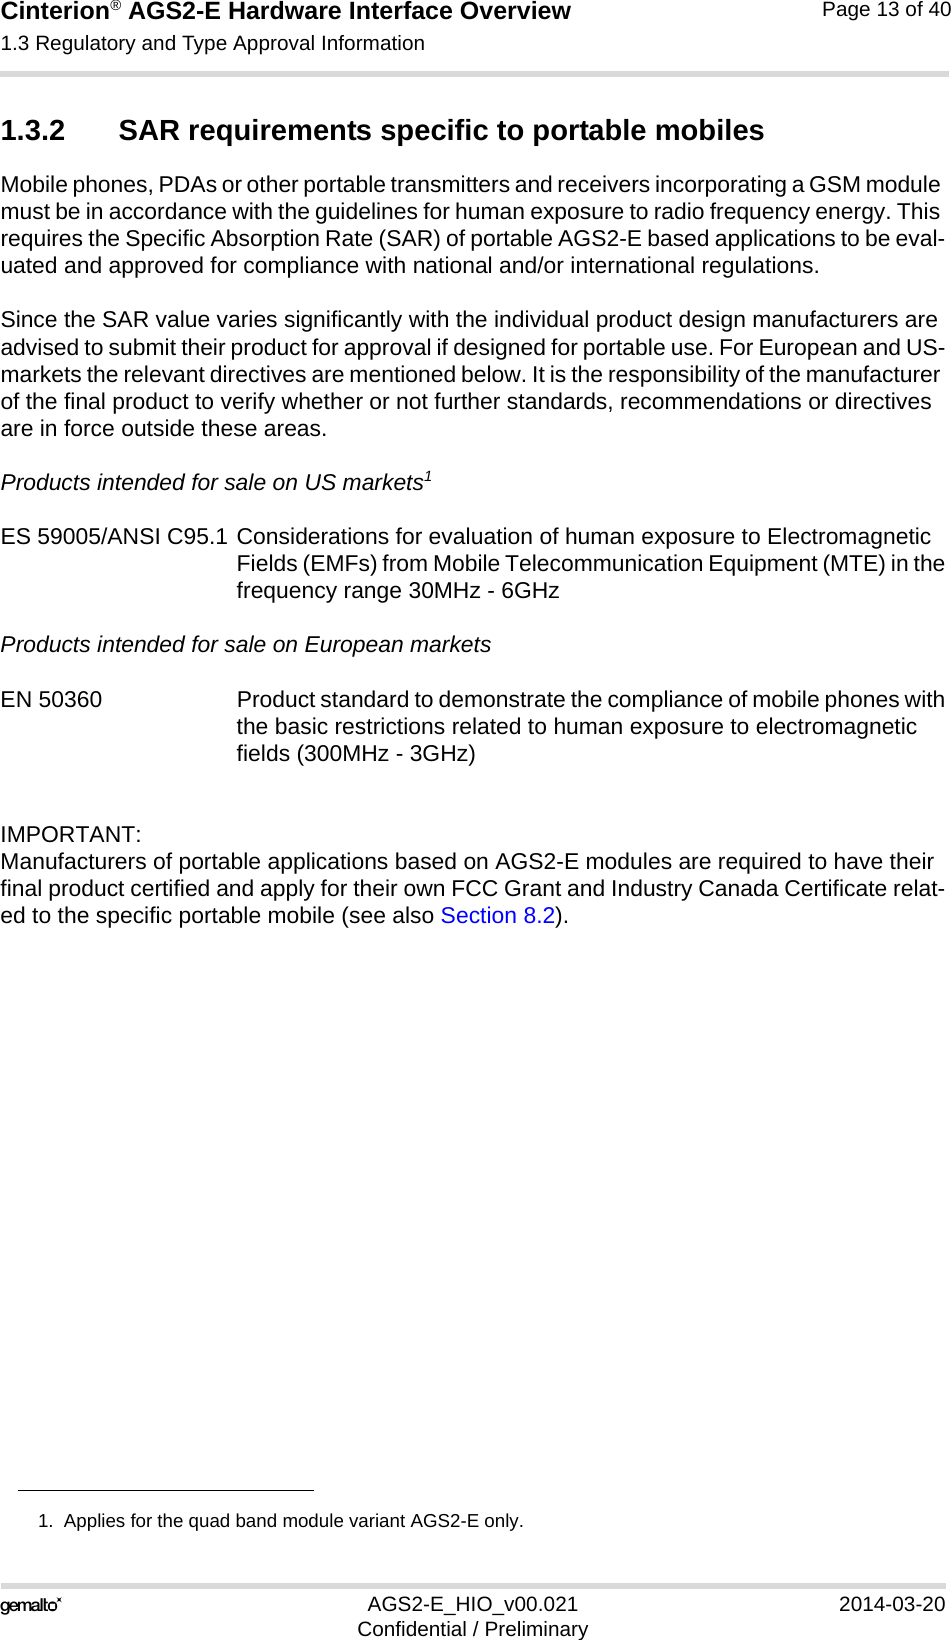 Cinterion® AGS2-E Hardware Interface Overview1.3 Regulatory and Type Approval Information14AGS2-E_HIO_v00.021 2014-03-20Confidential / PreliminaryPage 13 of 401.3.2 SAR requirements specific to portable mobilesMobile phones, PDAs or other portable transmitters and receivers incorporating a GSM module must be in accordance with the guidelines for human exposure to radio frequency energy. This requires the Specific Absorption Rate (SAR) of portable AGS2-E based applications to be eval-uated and approved for compliance with national and/or international regulations. Since the SAR value varies significantly with the individual product design manufacturers are advised to submit their product for approval if designed for portable use. For European and US-markets the relevant directives are mentioned below. It is the responsibility of the manufacturer of the final product to verify whether or not further standards, recommendations or directives are in force outside these areas. Products intended for sale on US markets1ES 59005/ANSI C95.1 Considerations for evaluation of human exposure to Electromagnetic Fields (EMFs) from Mobile Telecommunication Equipment (MTE) in thefrequency range 30MHz - 6GHz Products intended for sale on European marketsEN 50360 Product standard to demonstrate the compliance of mobile phones withthe basic restrictions related to human exposure to electromagnetic fields (300MHz - 3GHz)IMPORTANT:Manufacturers of portable applications based on AGS2-E modules are required to have their final product certified and apply for their own FCC Grant and Industry Canada Certificate relat-ed to the specific portable mobile (see also Section 8.2).1.  Applies for the quad band module variant AGS2-E only.